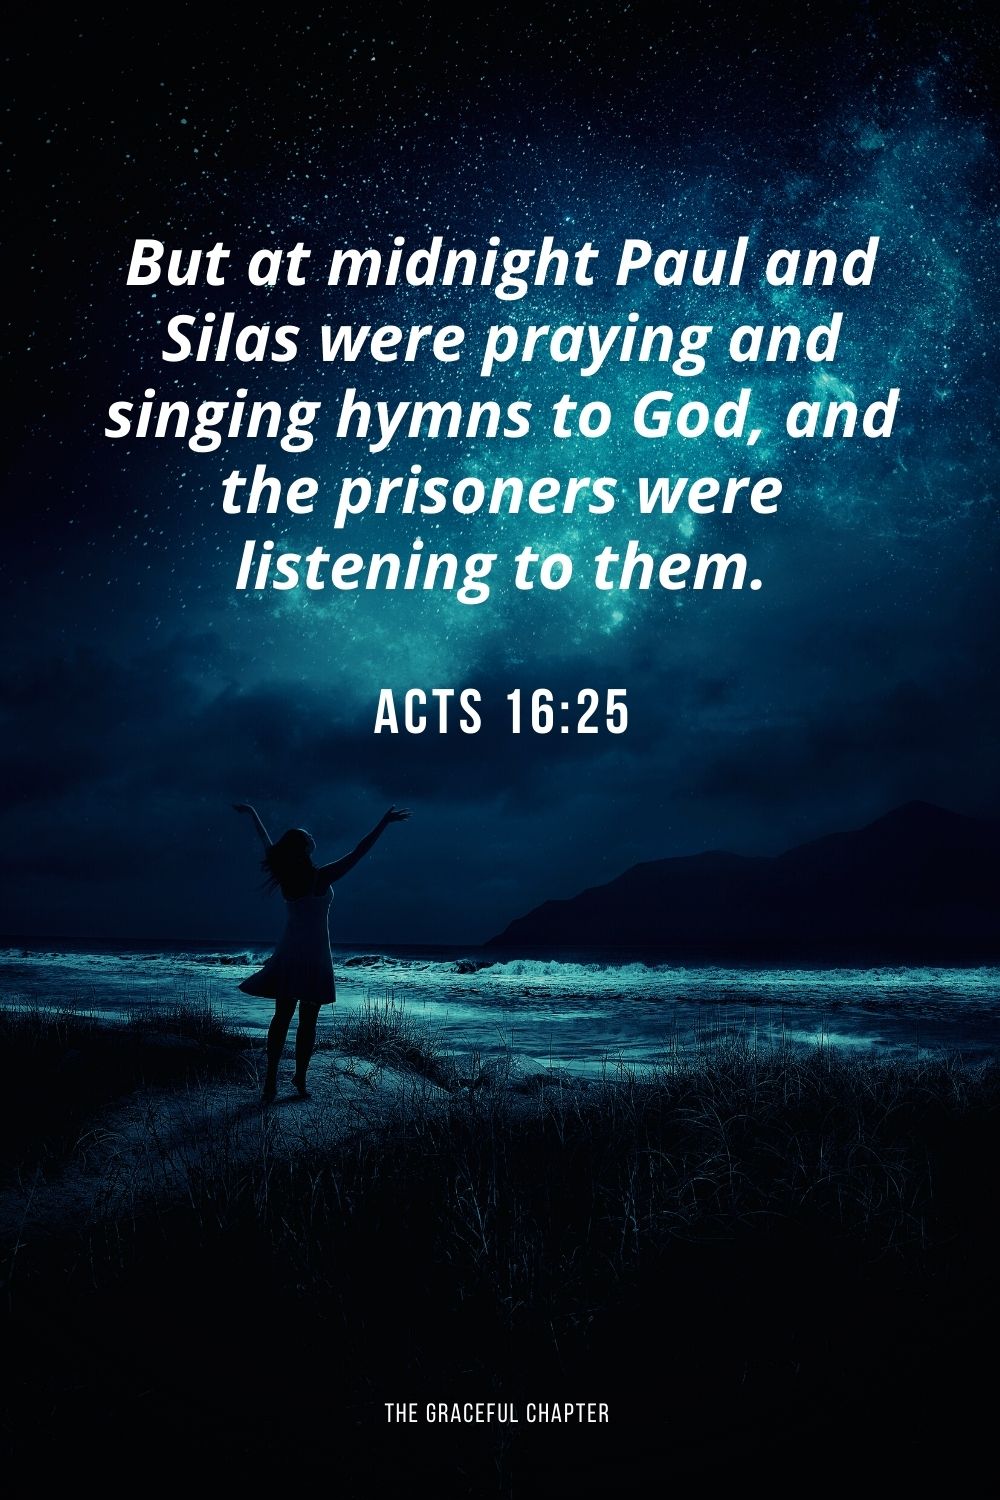 But at midnight Paul and Silas were praying and singing hymns to God, and the prisoners were listening to them. Acts 16:25